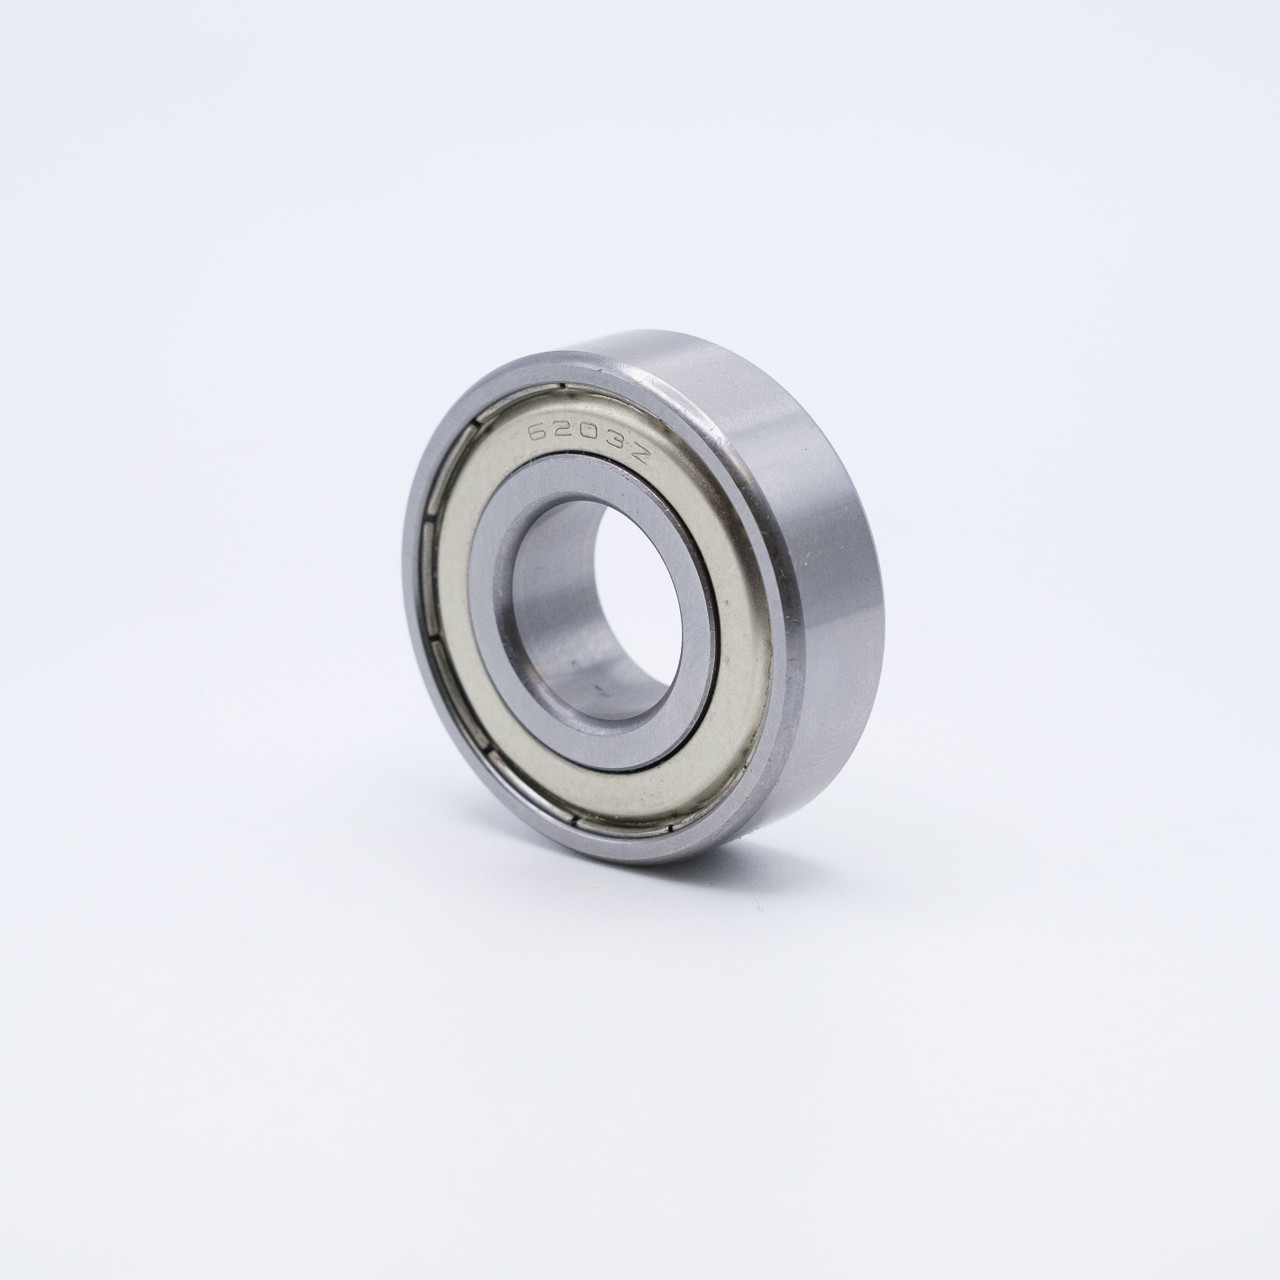 S6208-ZZ Stainless Ball Bearing 40x80x18 Angled View